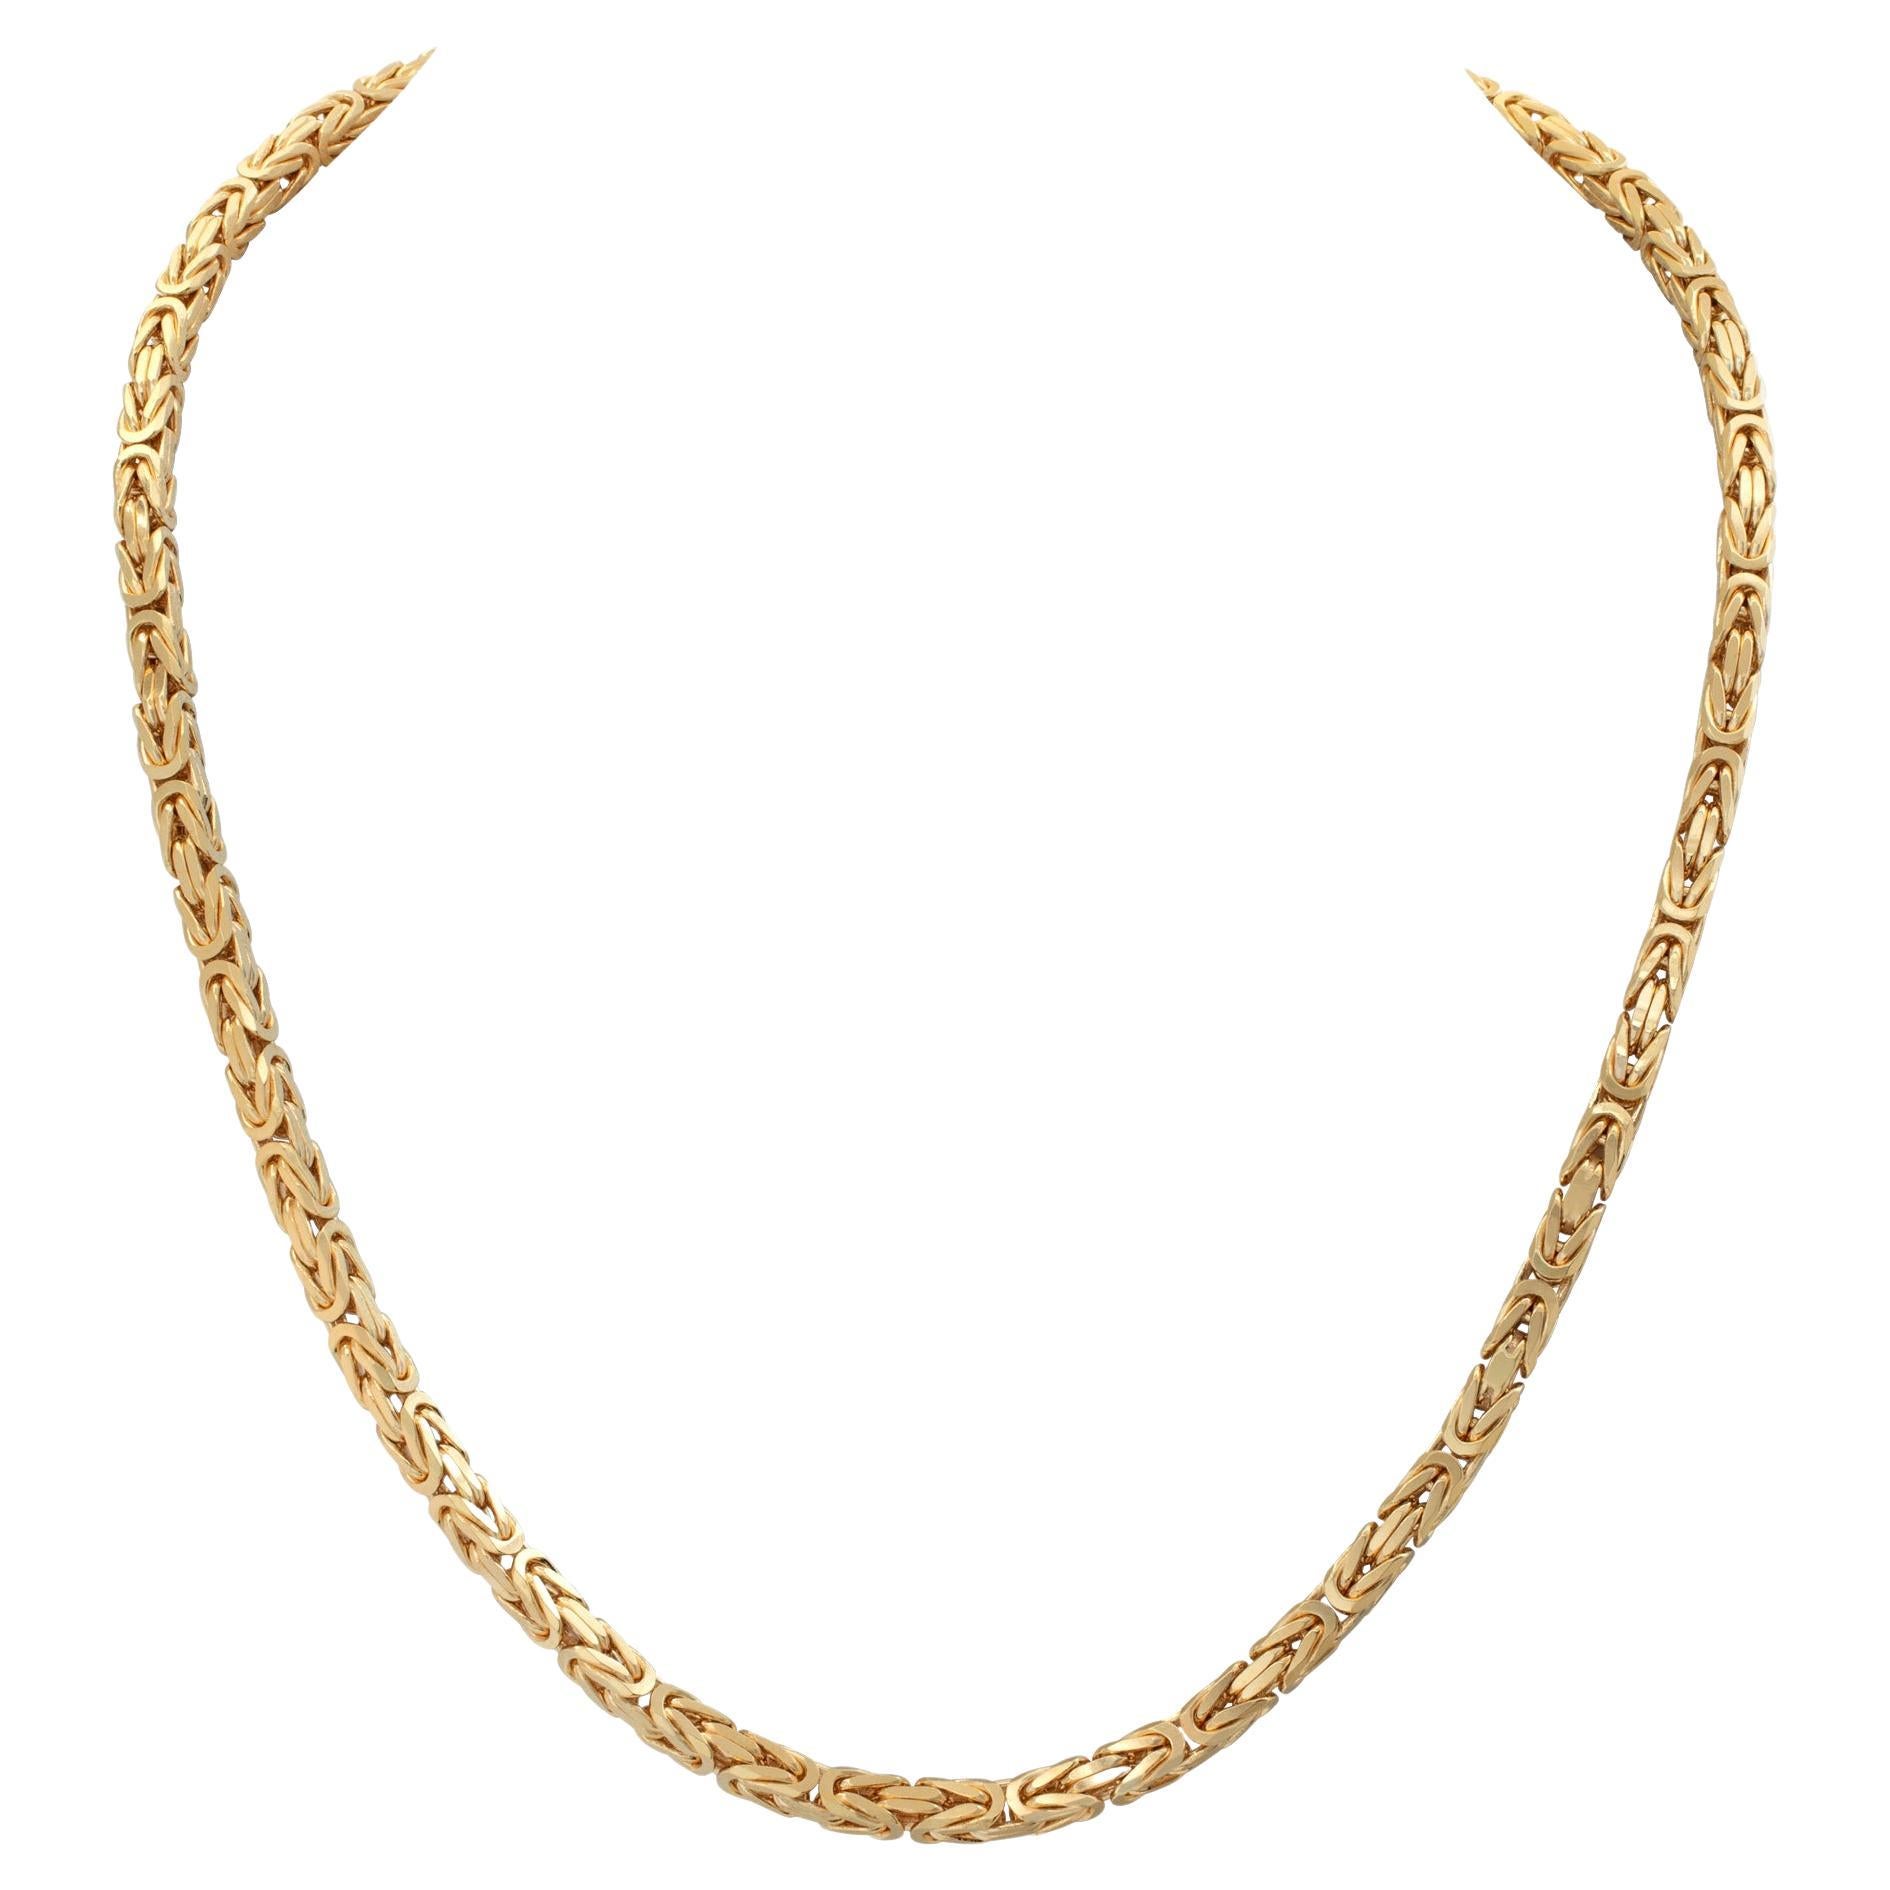 Heavy 18k Byzantine Square Chain Necklace with Heavy Large Lobster Clasp